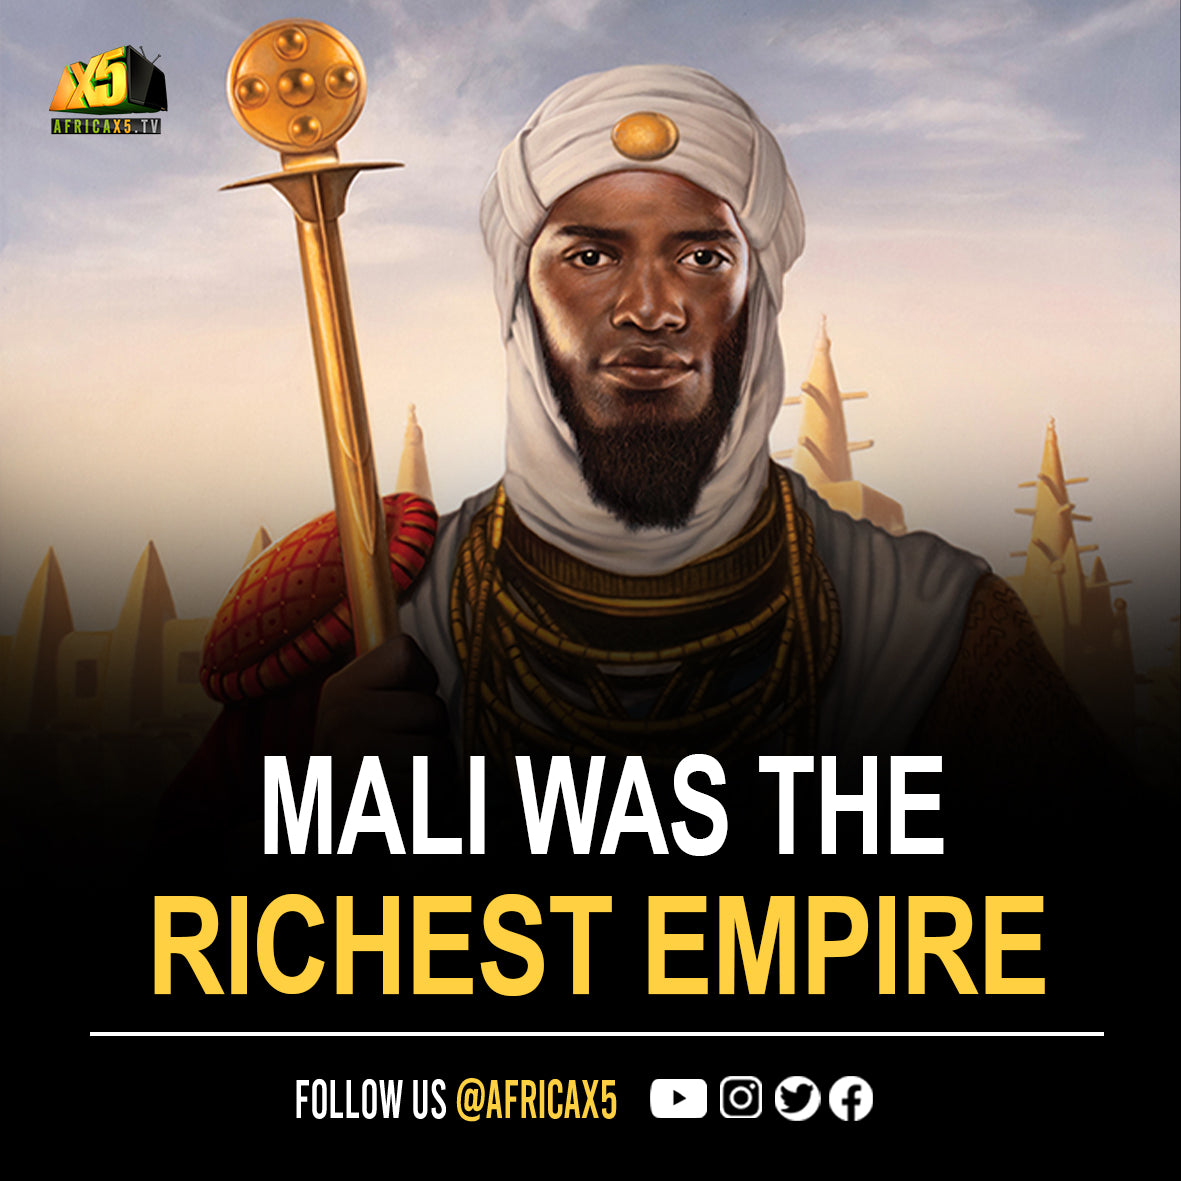 Mali in West Africa was the richest Empire on Earth in the 14th century